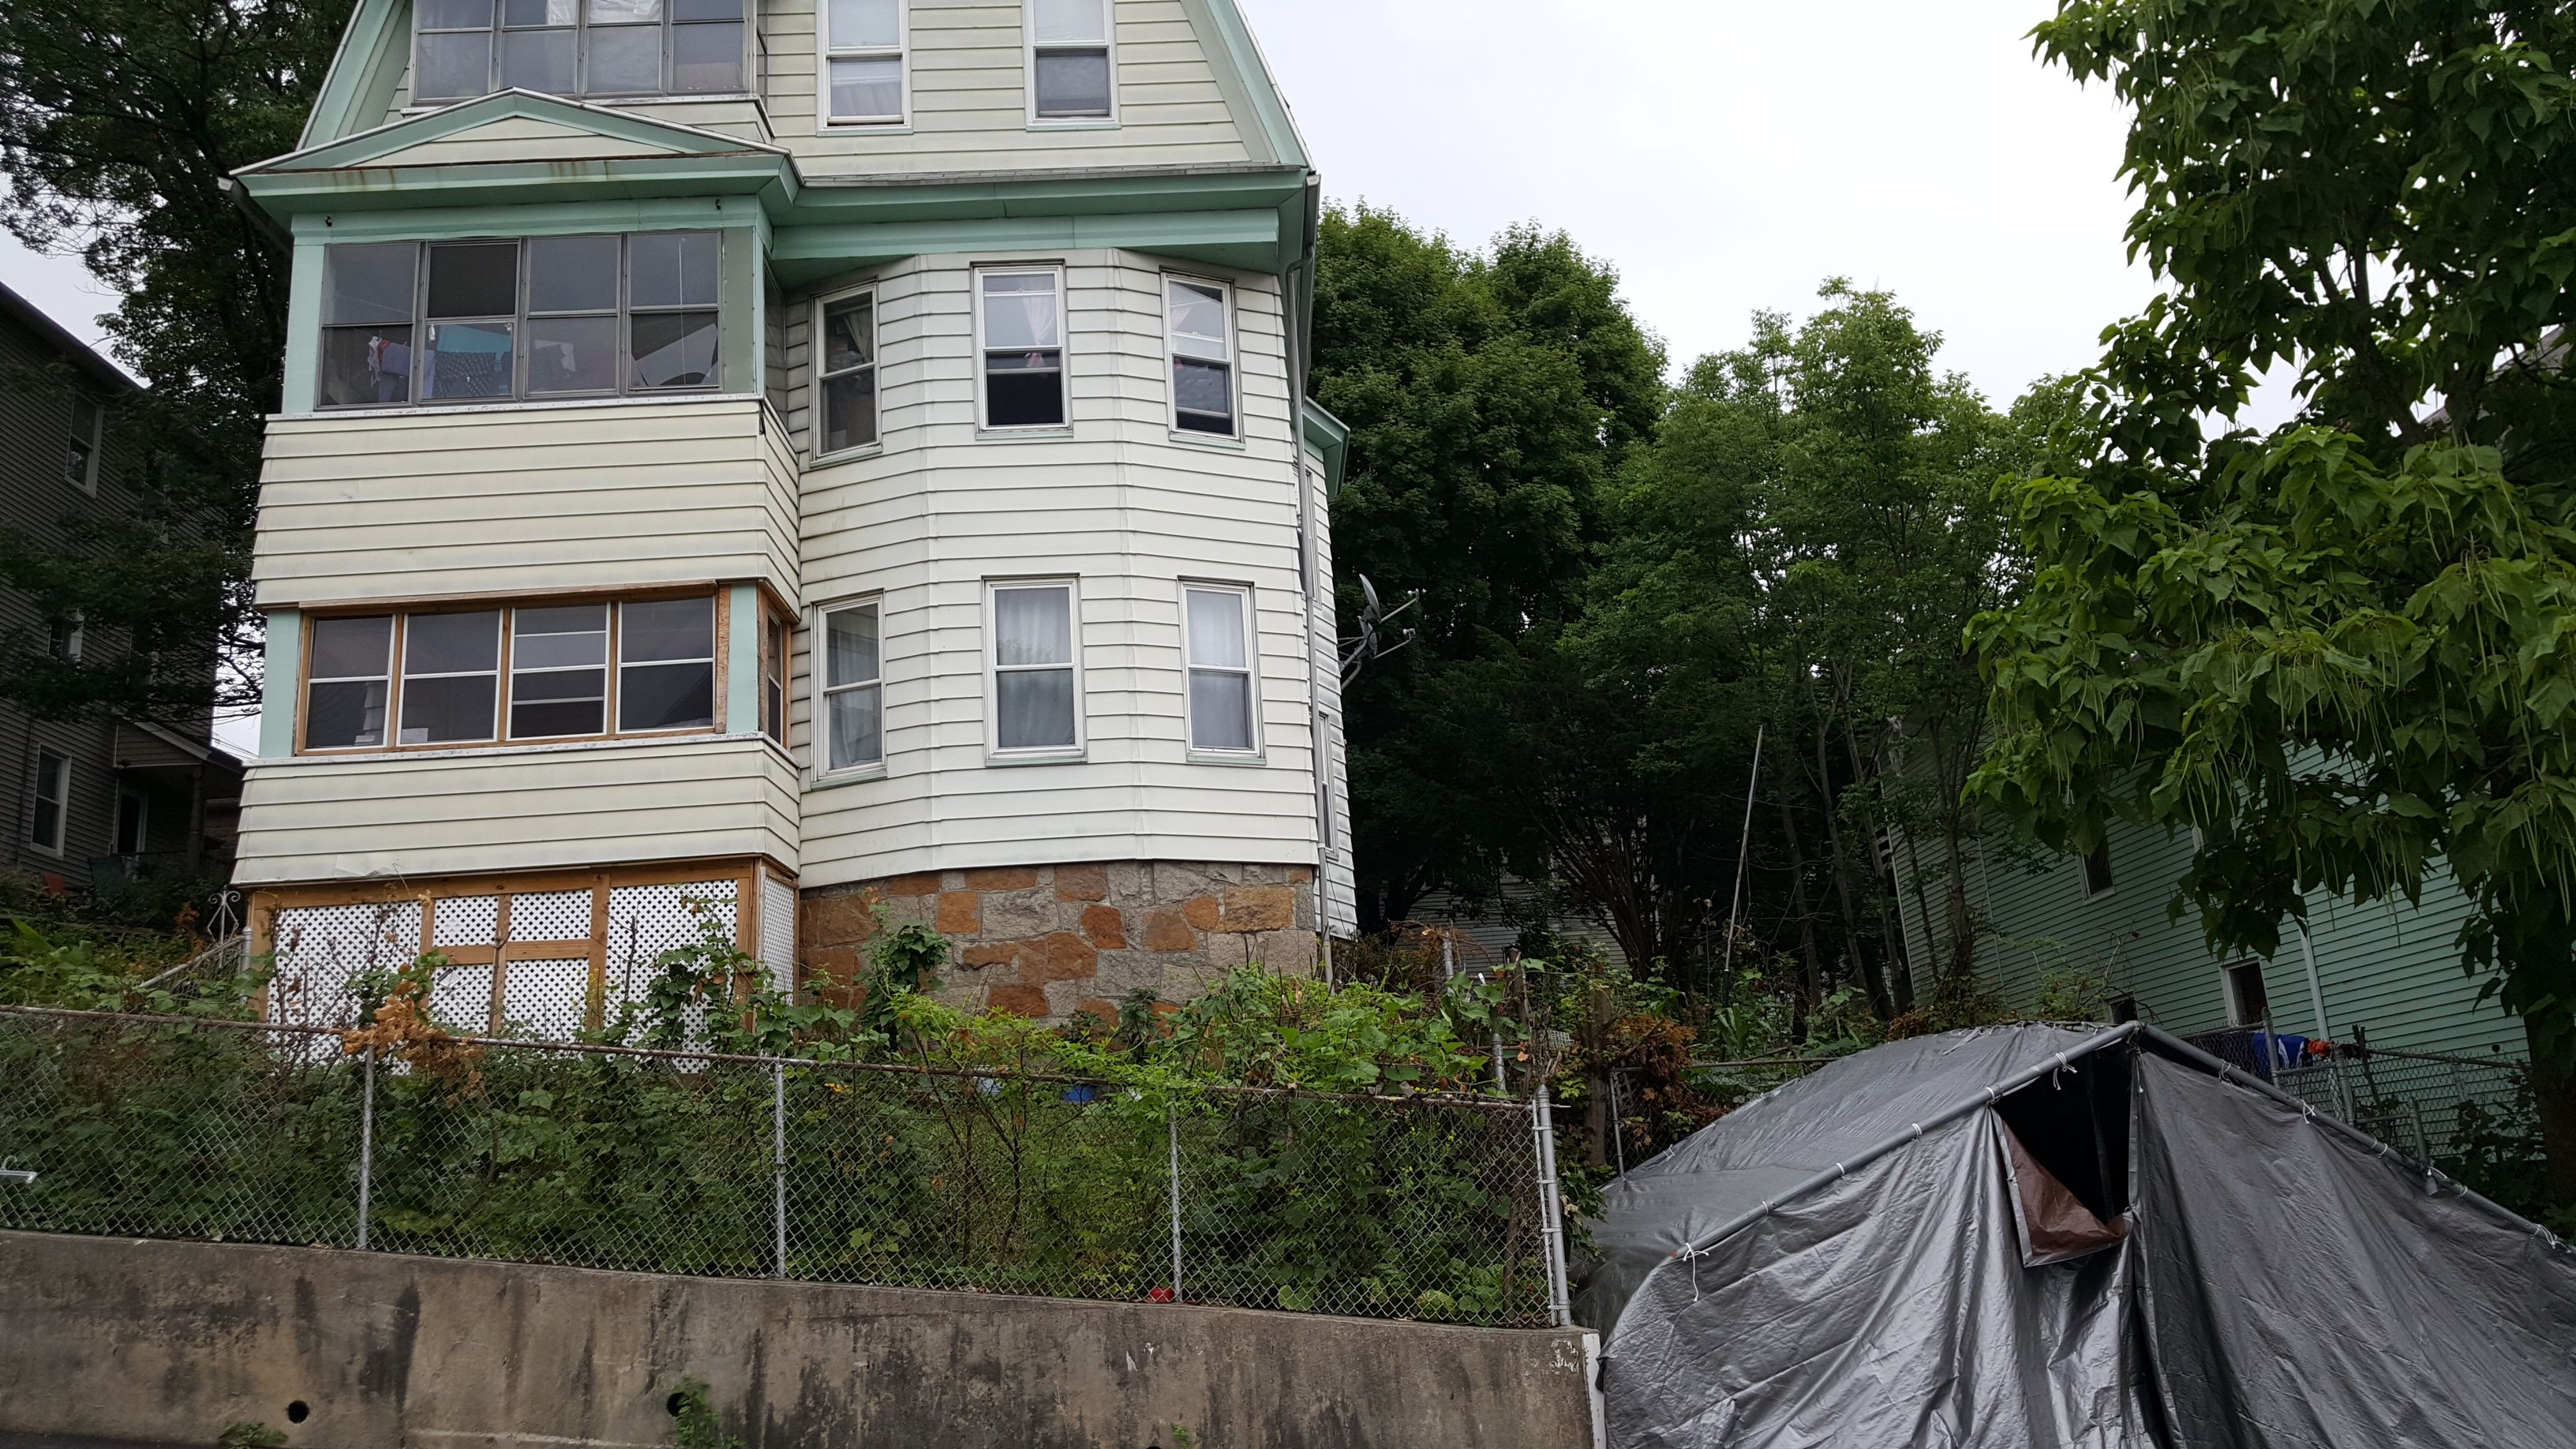 A full house with several apartments housing several different refugee families and a garden in the front. Image by Ani Gururaj. Massachusetts, 2018.